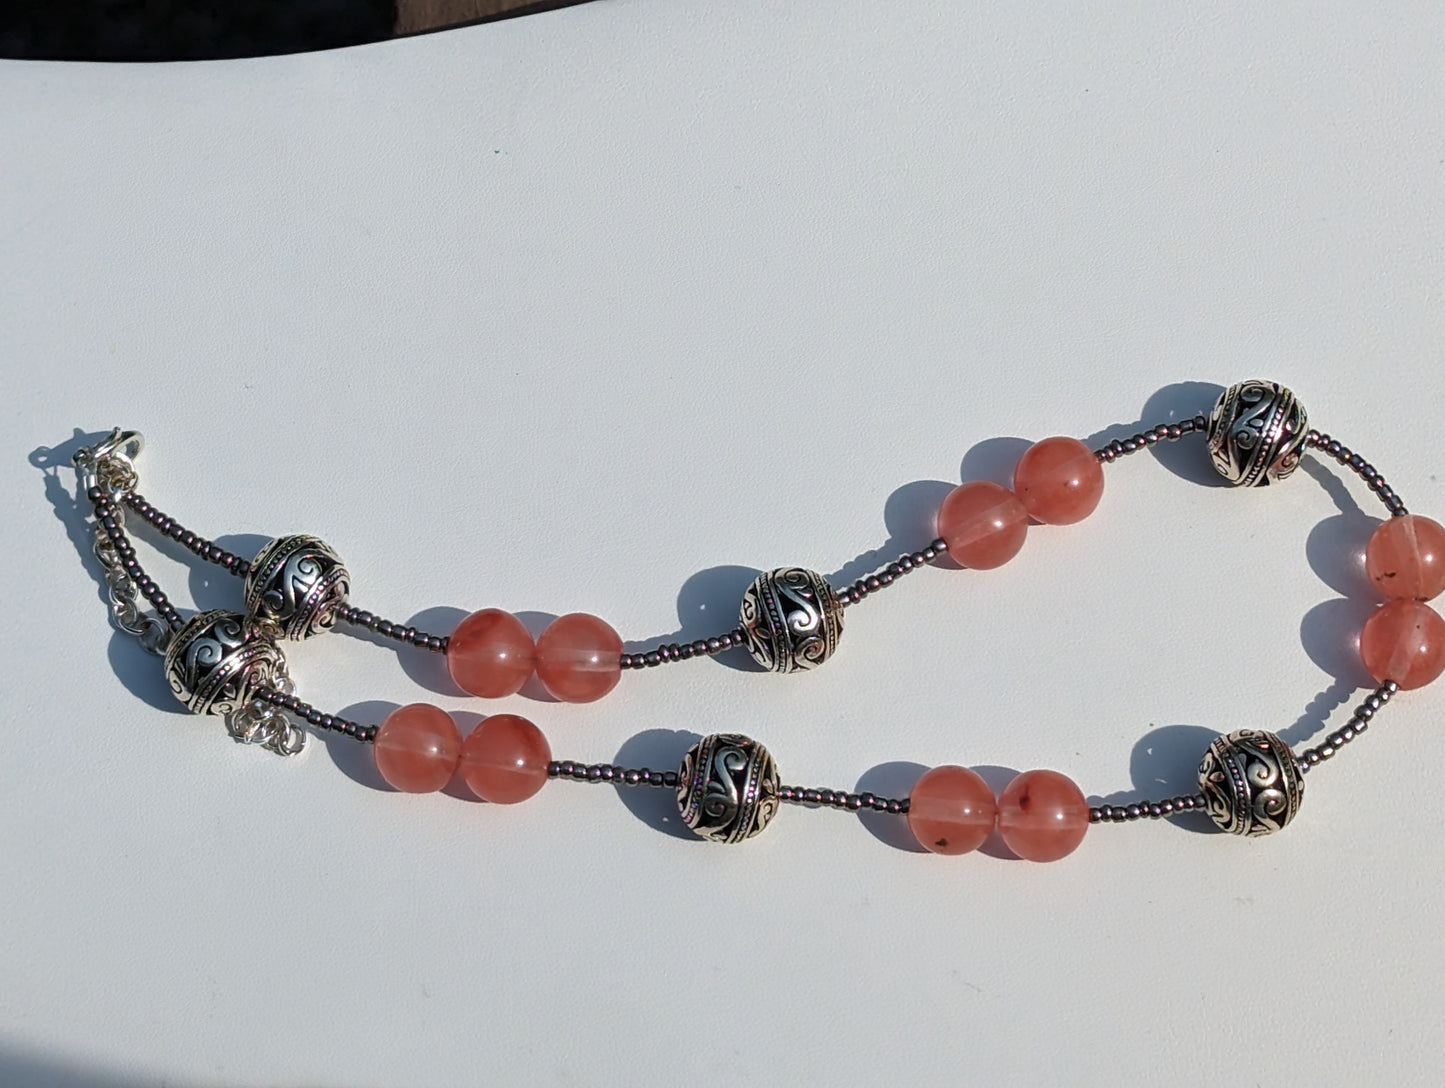 Strawberry Quartz Necklace with Silver-plated Filigree Bead Accents